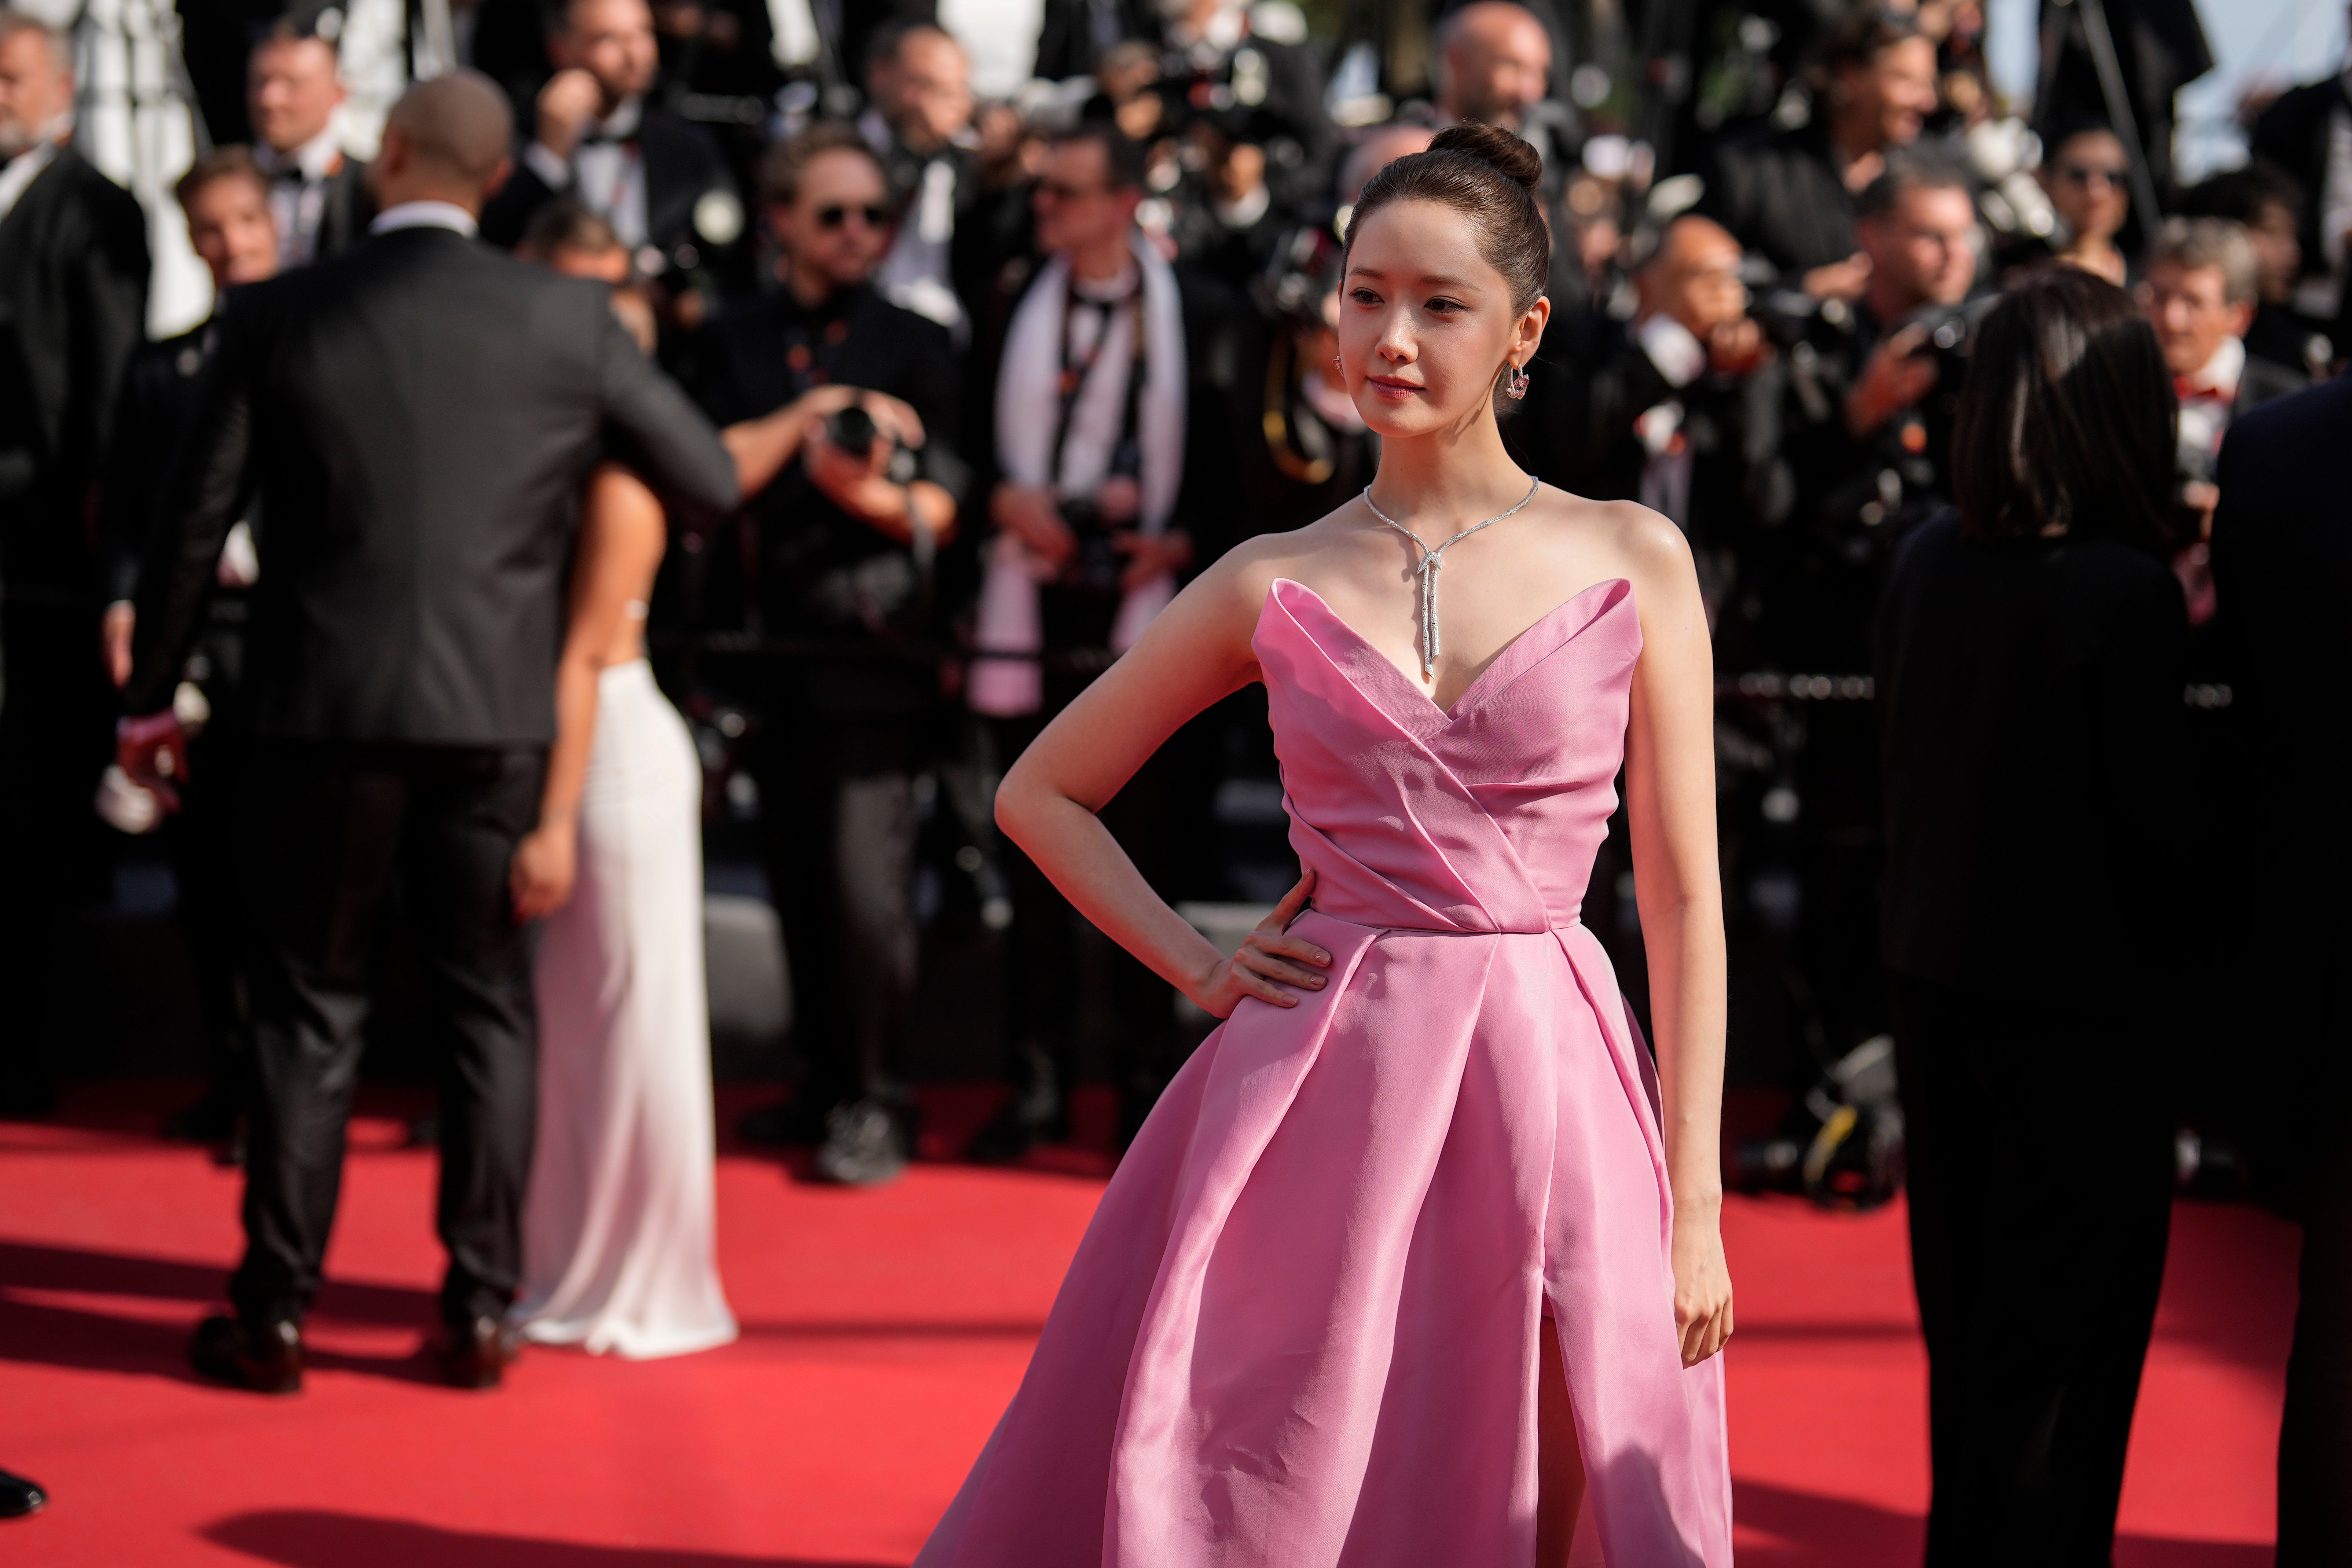 An unidentified female security has been criticized for her treatment of Korean actor Im Yoon-ah (pictured) on the red carpet at Cannes